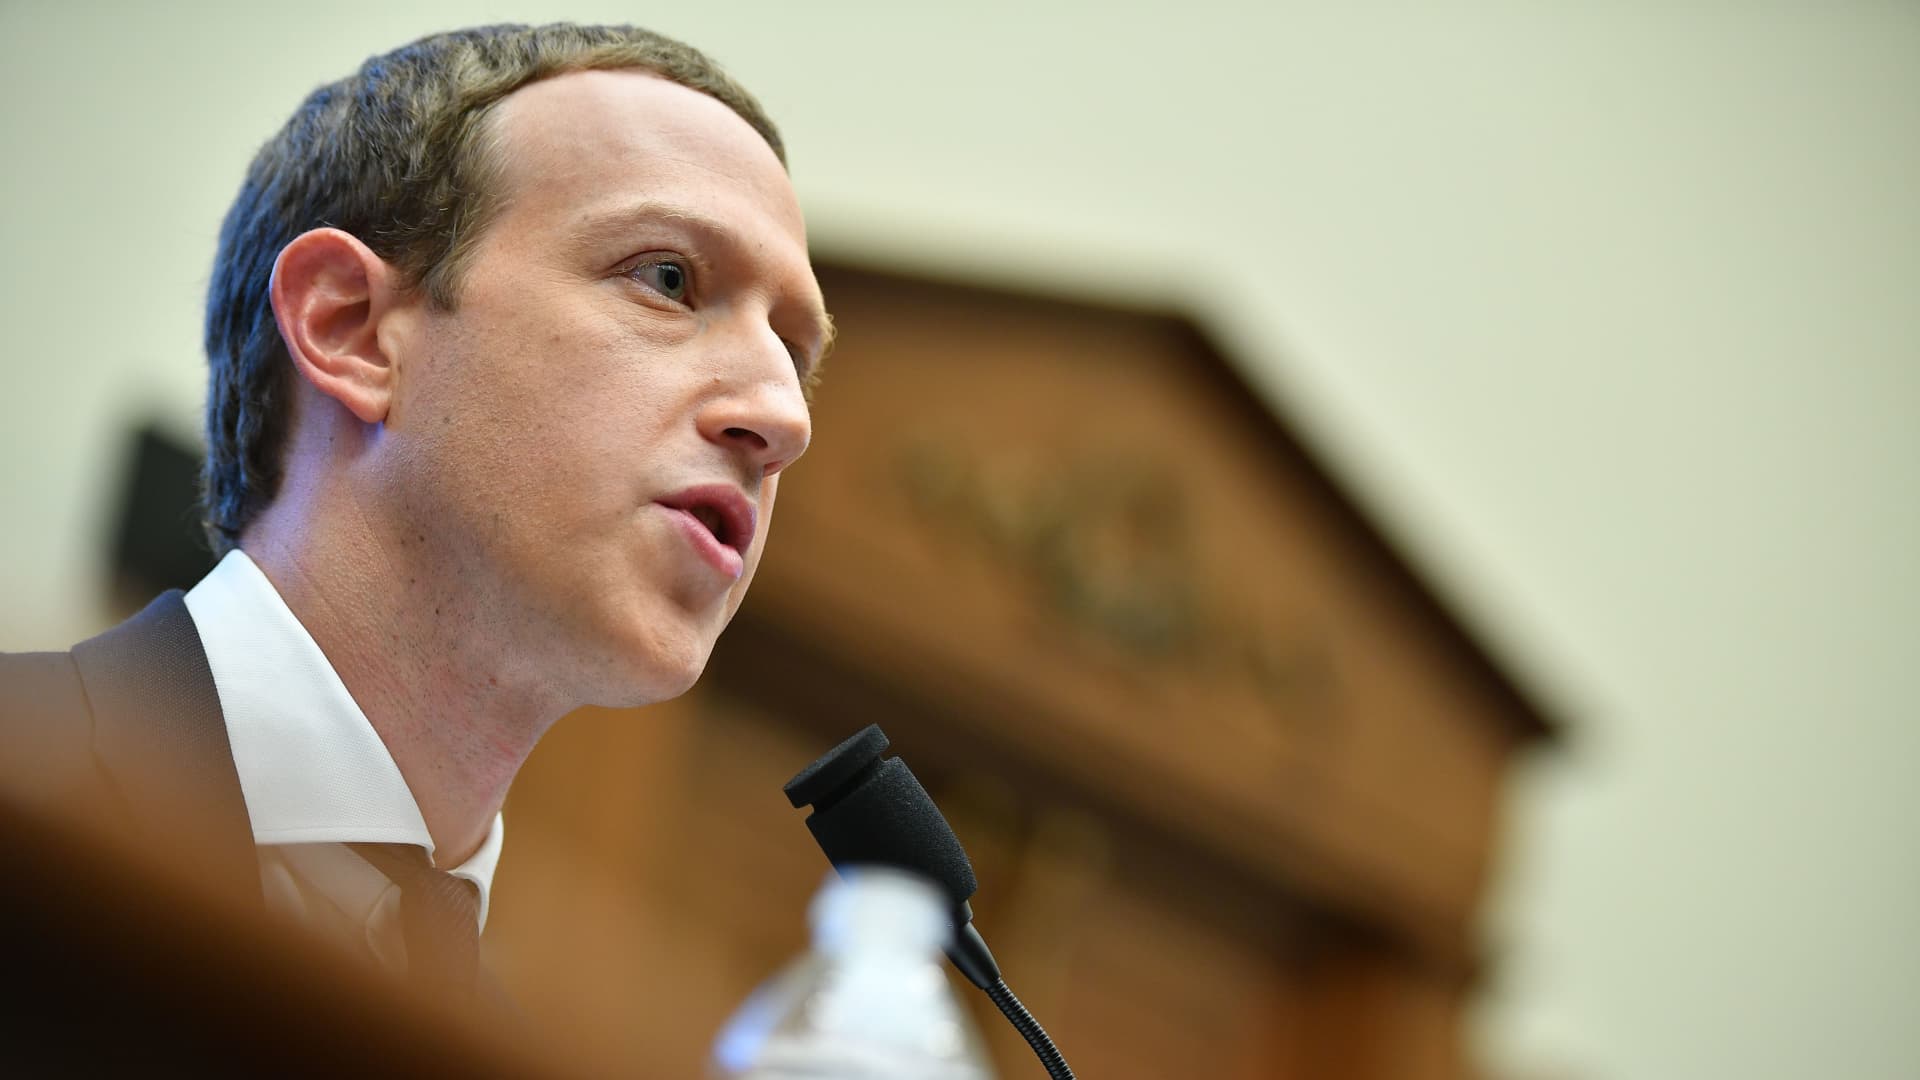 Mark Zuckerberg said he missed a giant shift in social networking